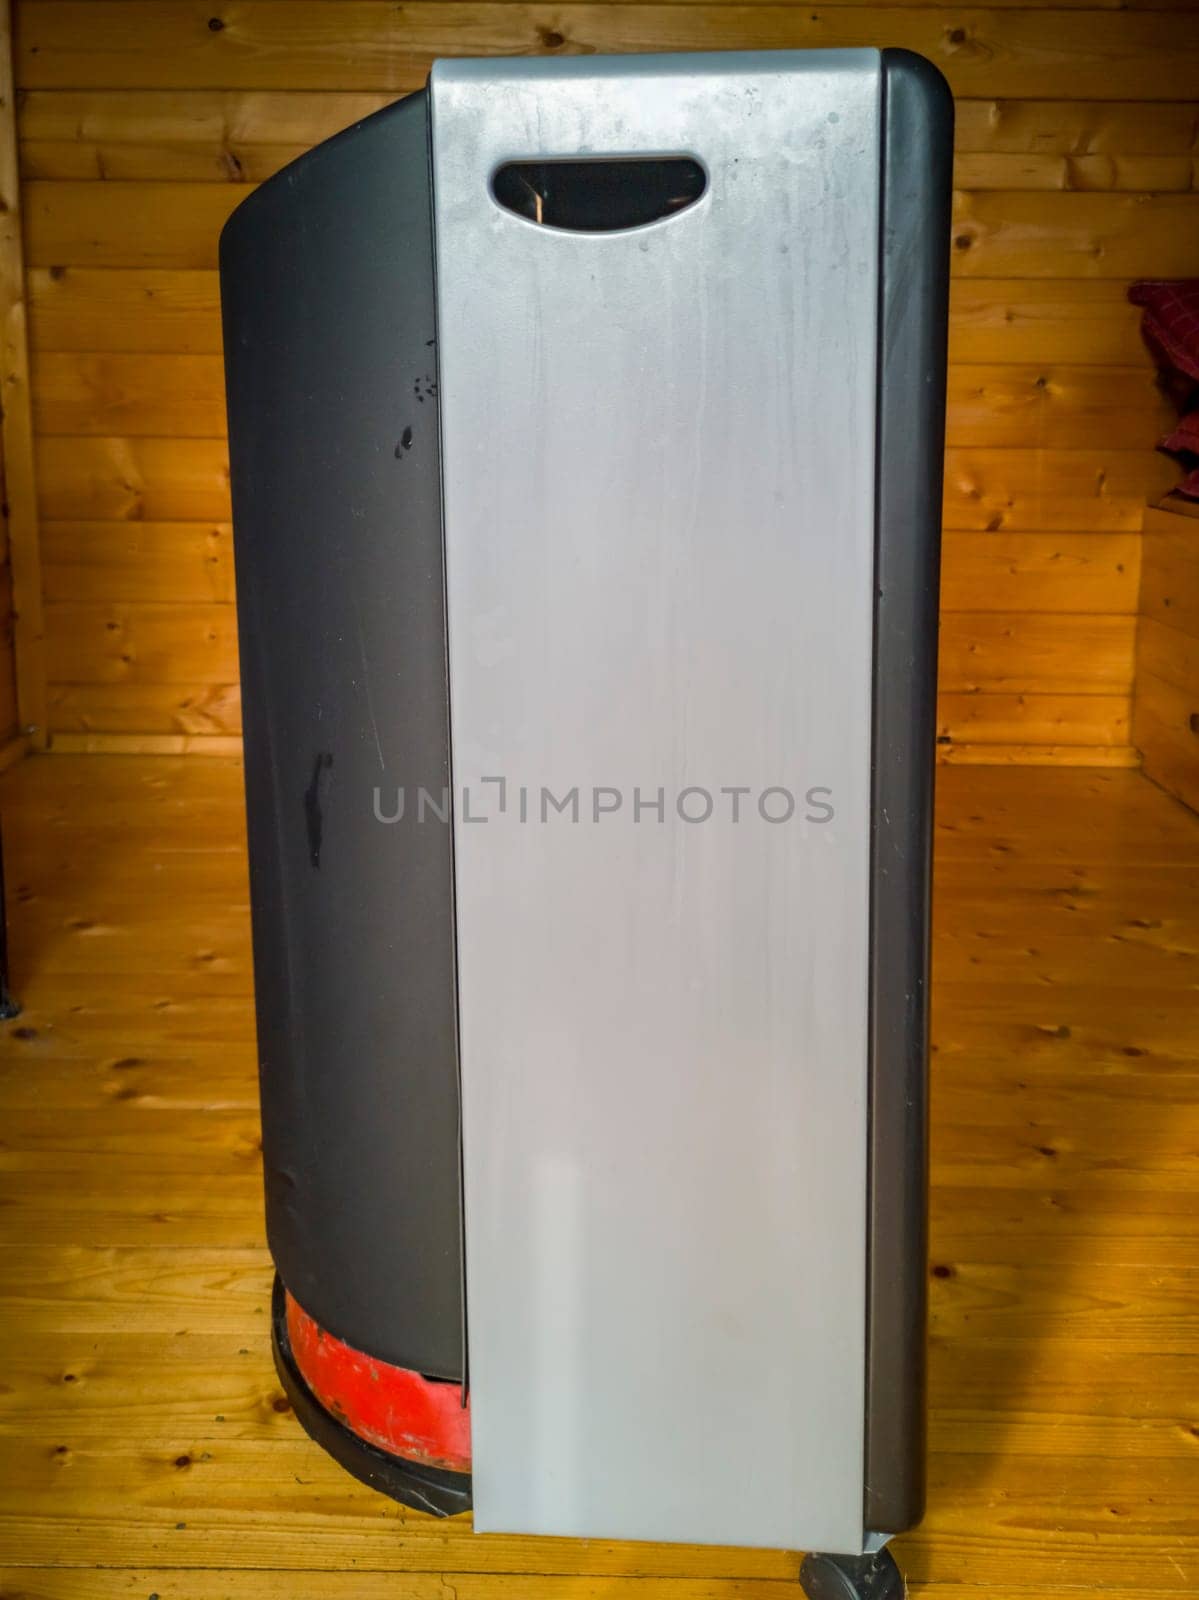 Mobile gas heater with bottle for camping.